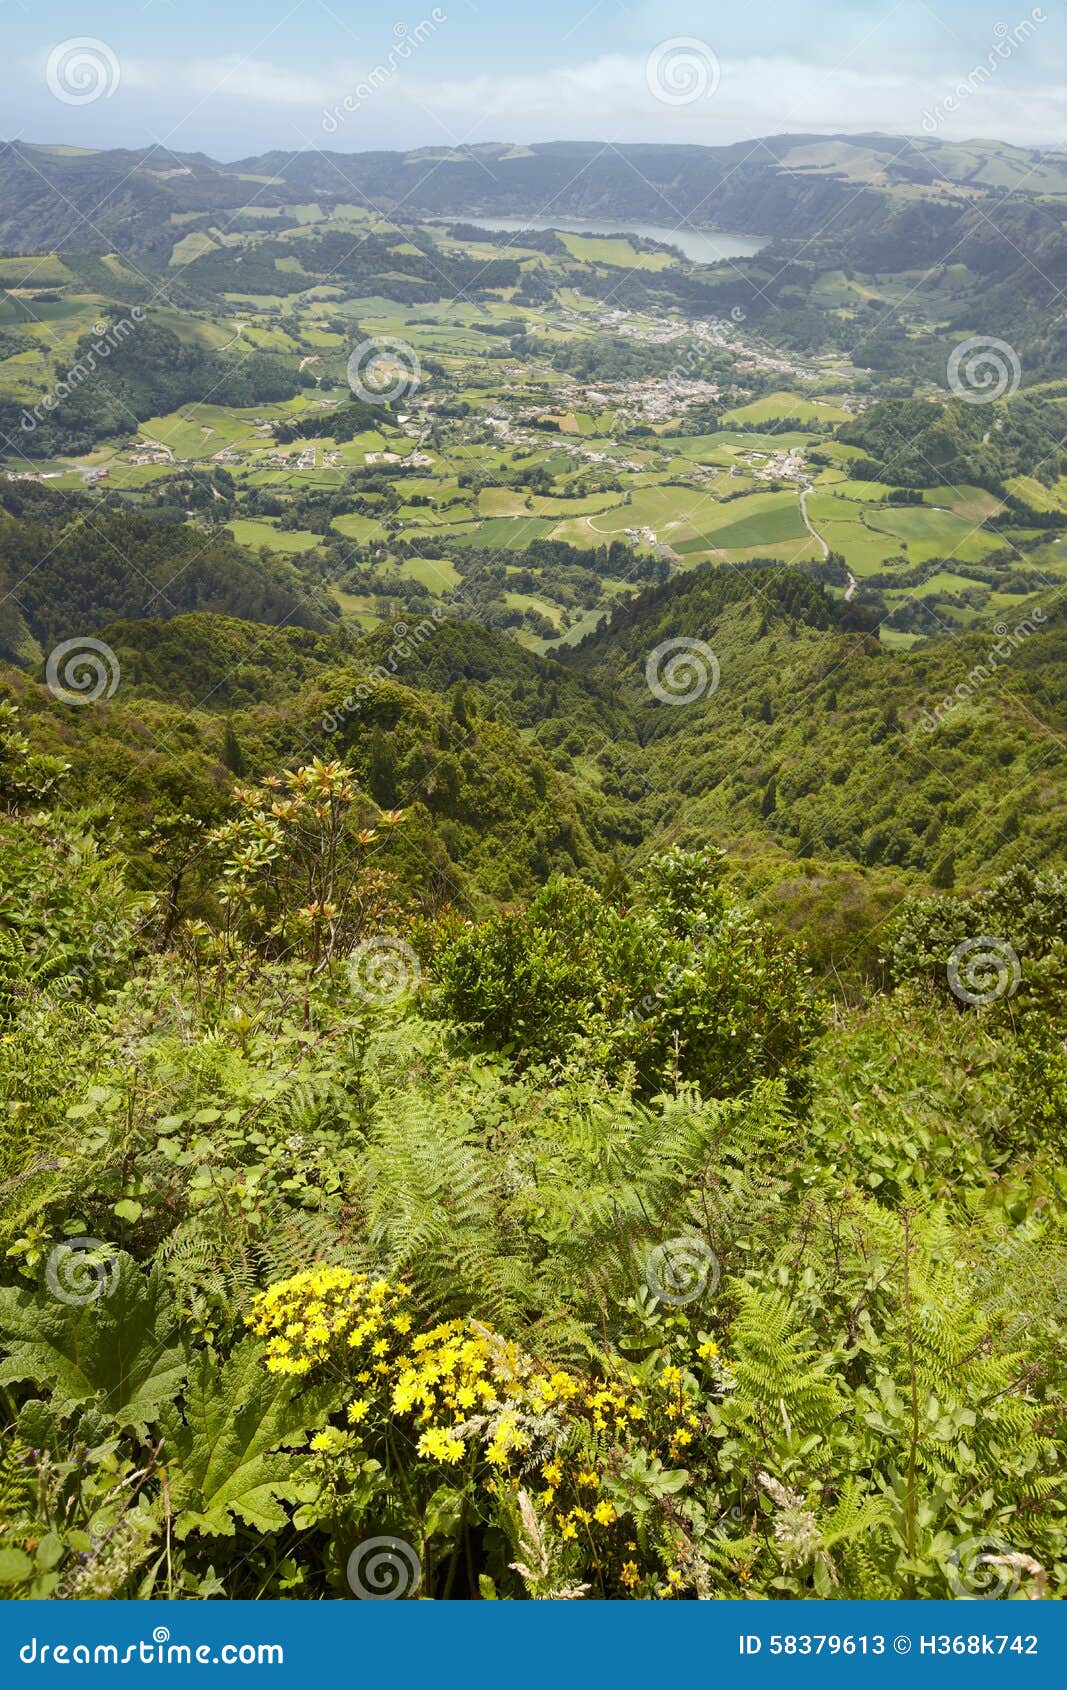 azores landscape with furnas lake and village from salto cavalo